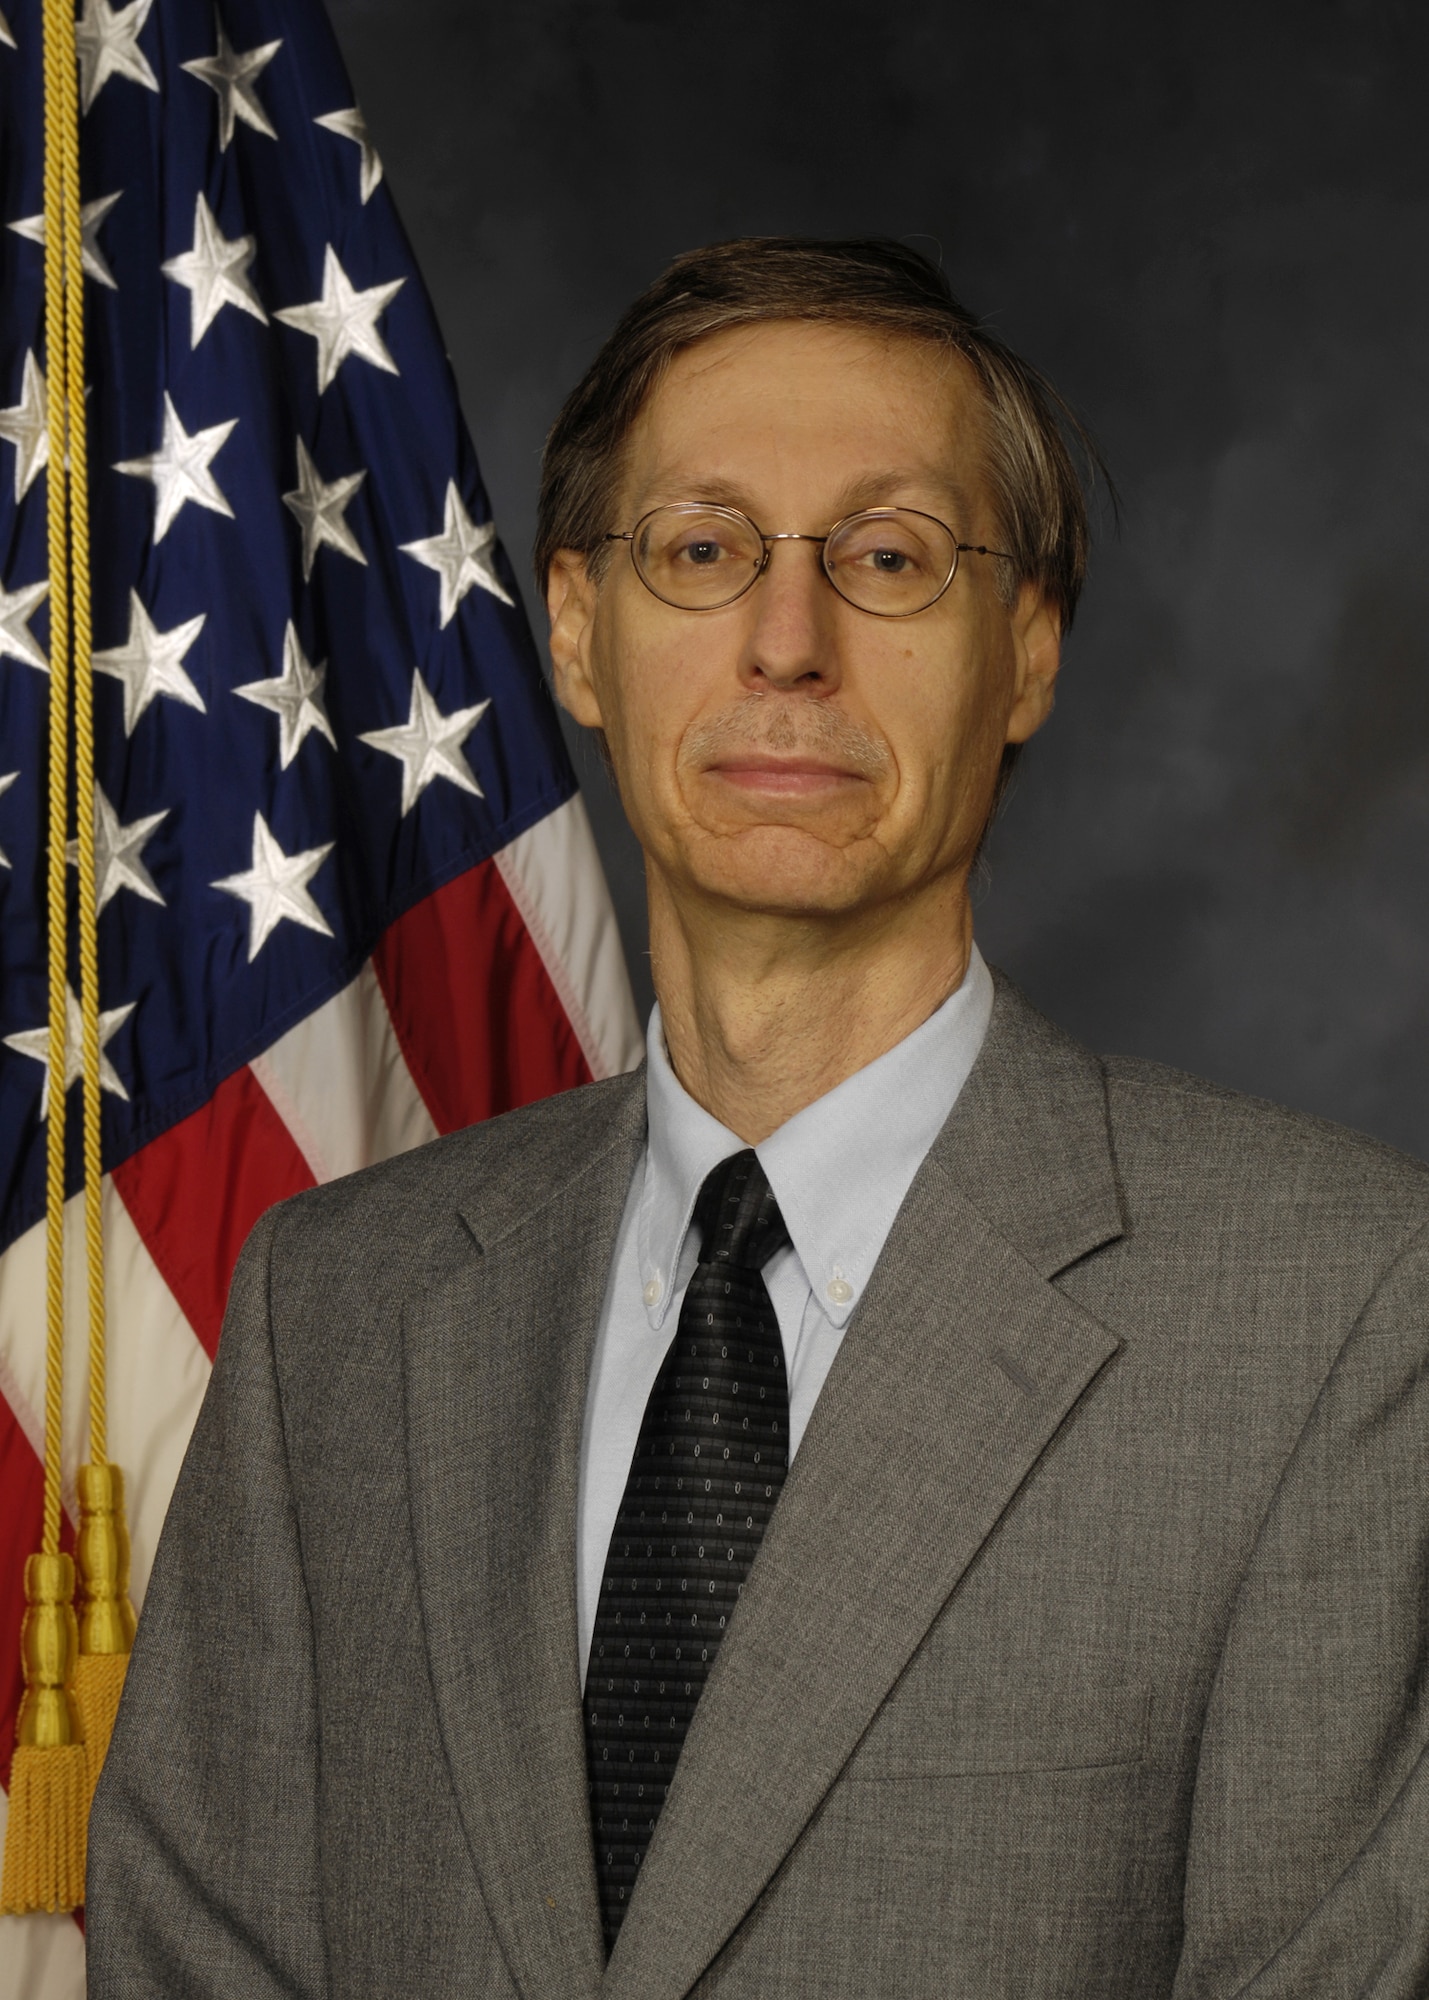 Mr. Edmund G. Zelnio (Sensors Directorate), is a principal research physicist, is considered the ‘father’ of Air Force Automatic Target Recognition (ATR) technology having served on over thirty academic and defense panels and providing technical leadership for well over $300 million of ATR research and development, guiding the transition of ATR for air-to-air, air-to-ground, and intelligence applications.